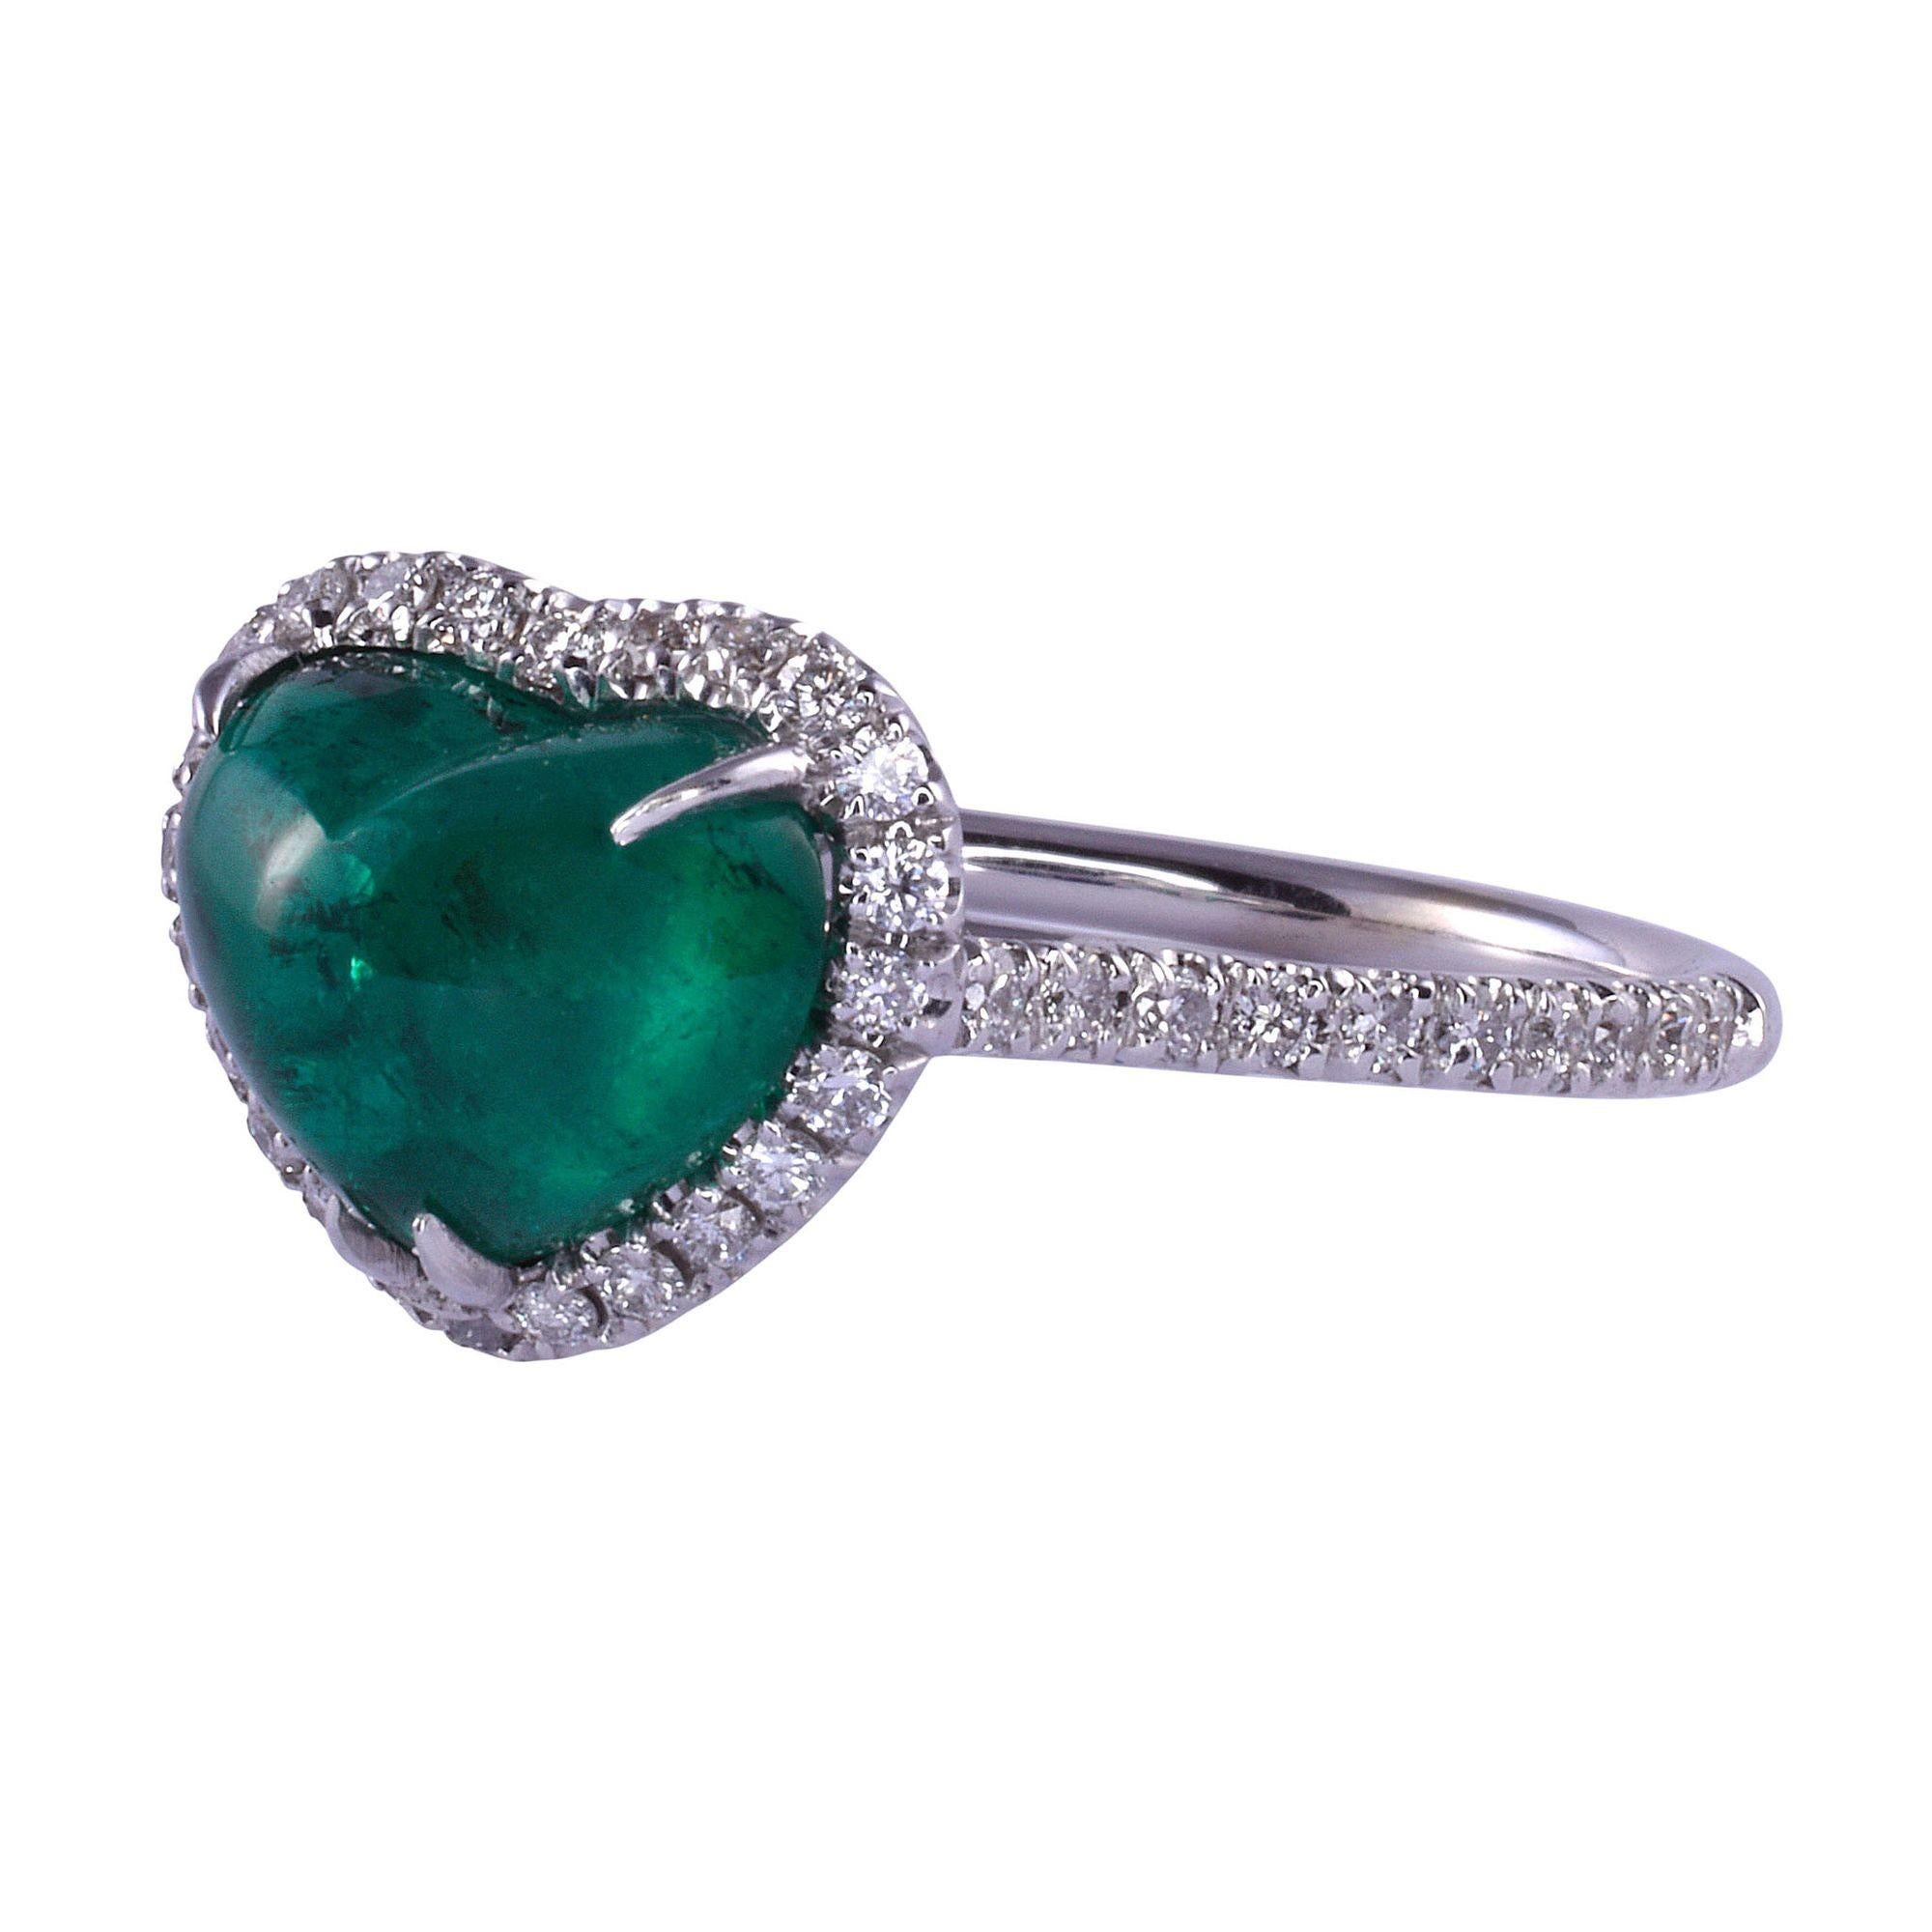 Estate heart cabochon Colombian emerald ring. This heart ring is crafted in 18 karat white gold featuring a 2.45 carat heart shaped cabochon Colombian emerald. The heart emerald ring has .35 carat total weight of diamond accents and is excellently